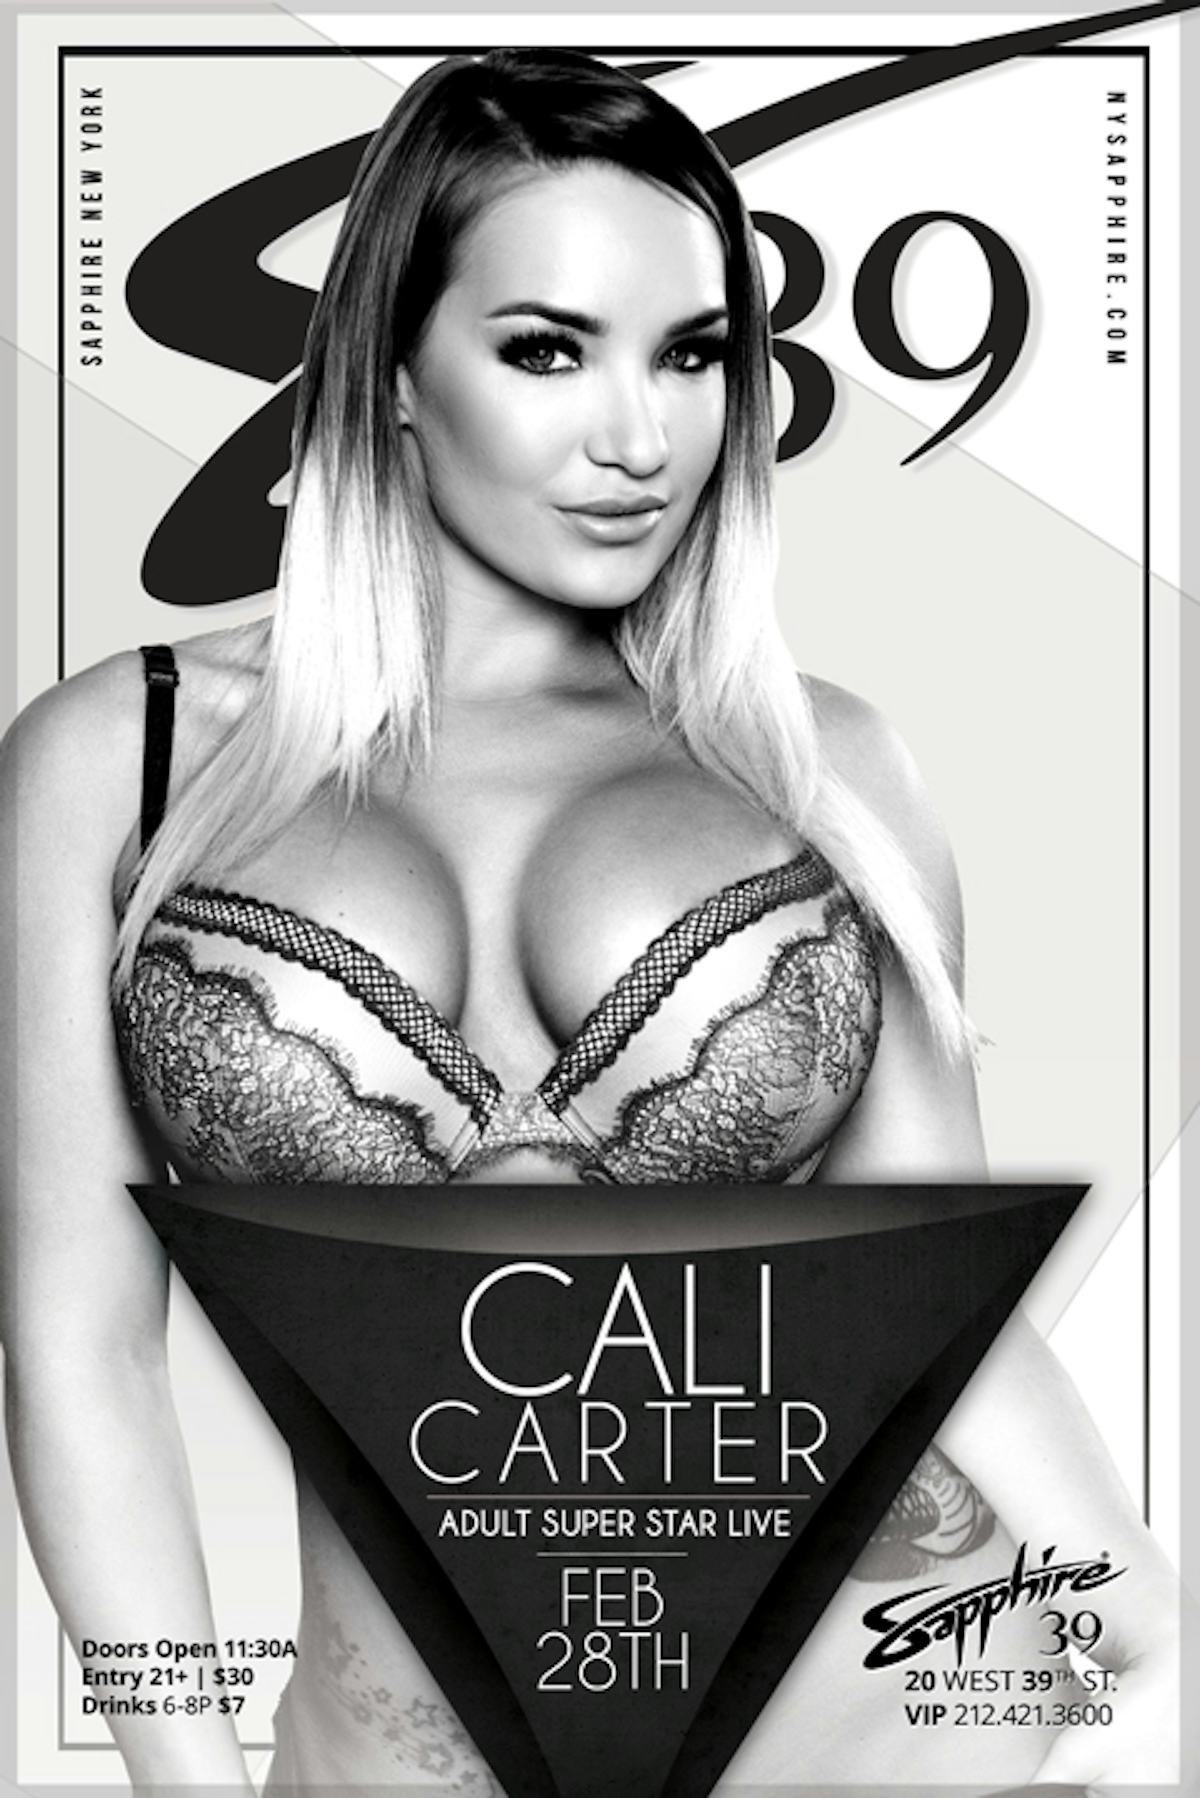 Who is cali carter